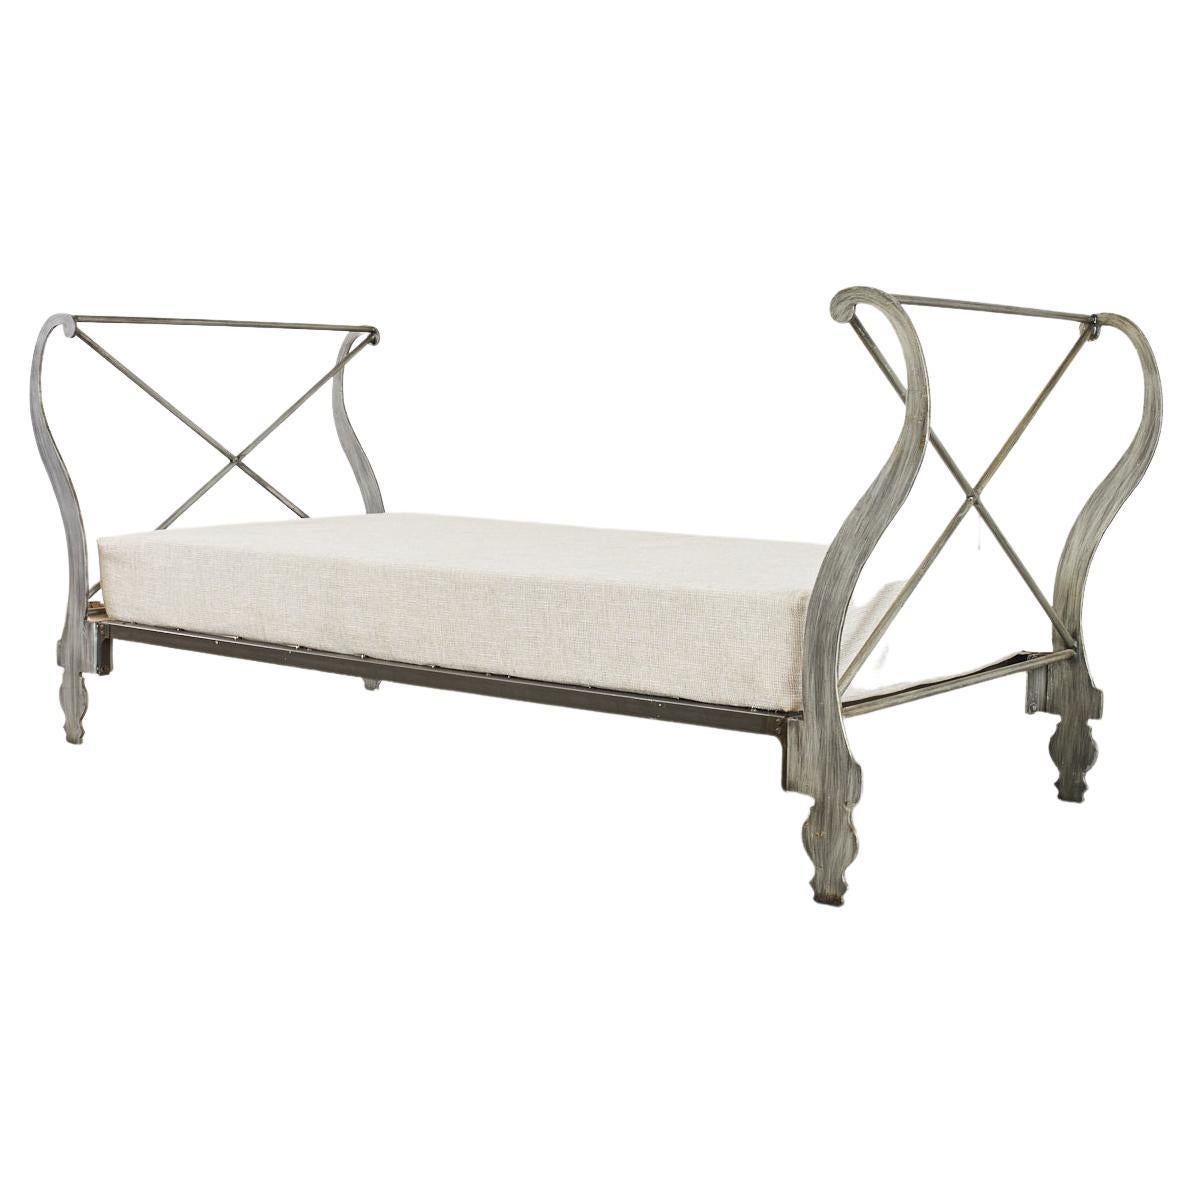 Italian Neoclassical Style Iron Scrolled Daybed For Sale